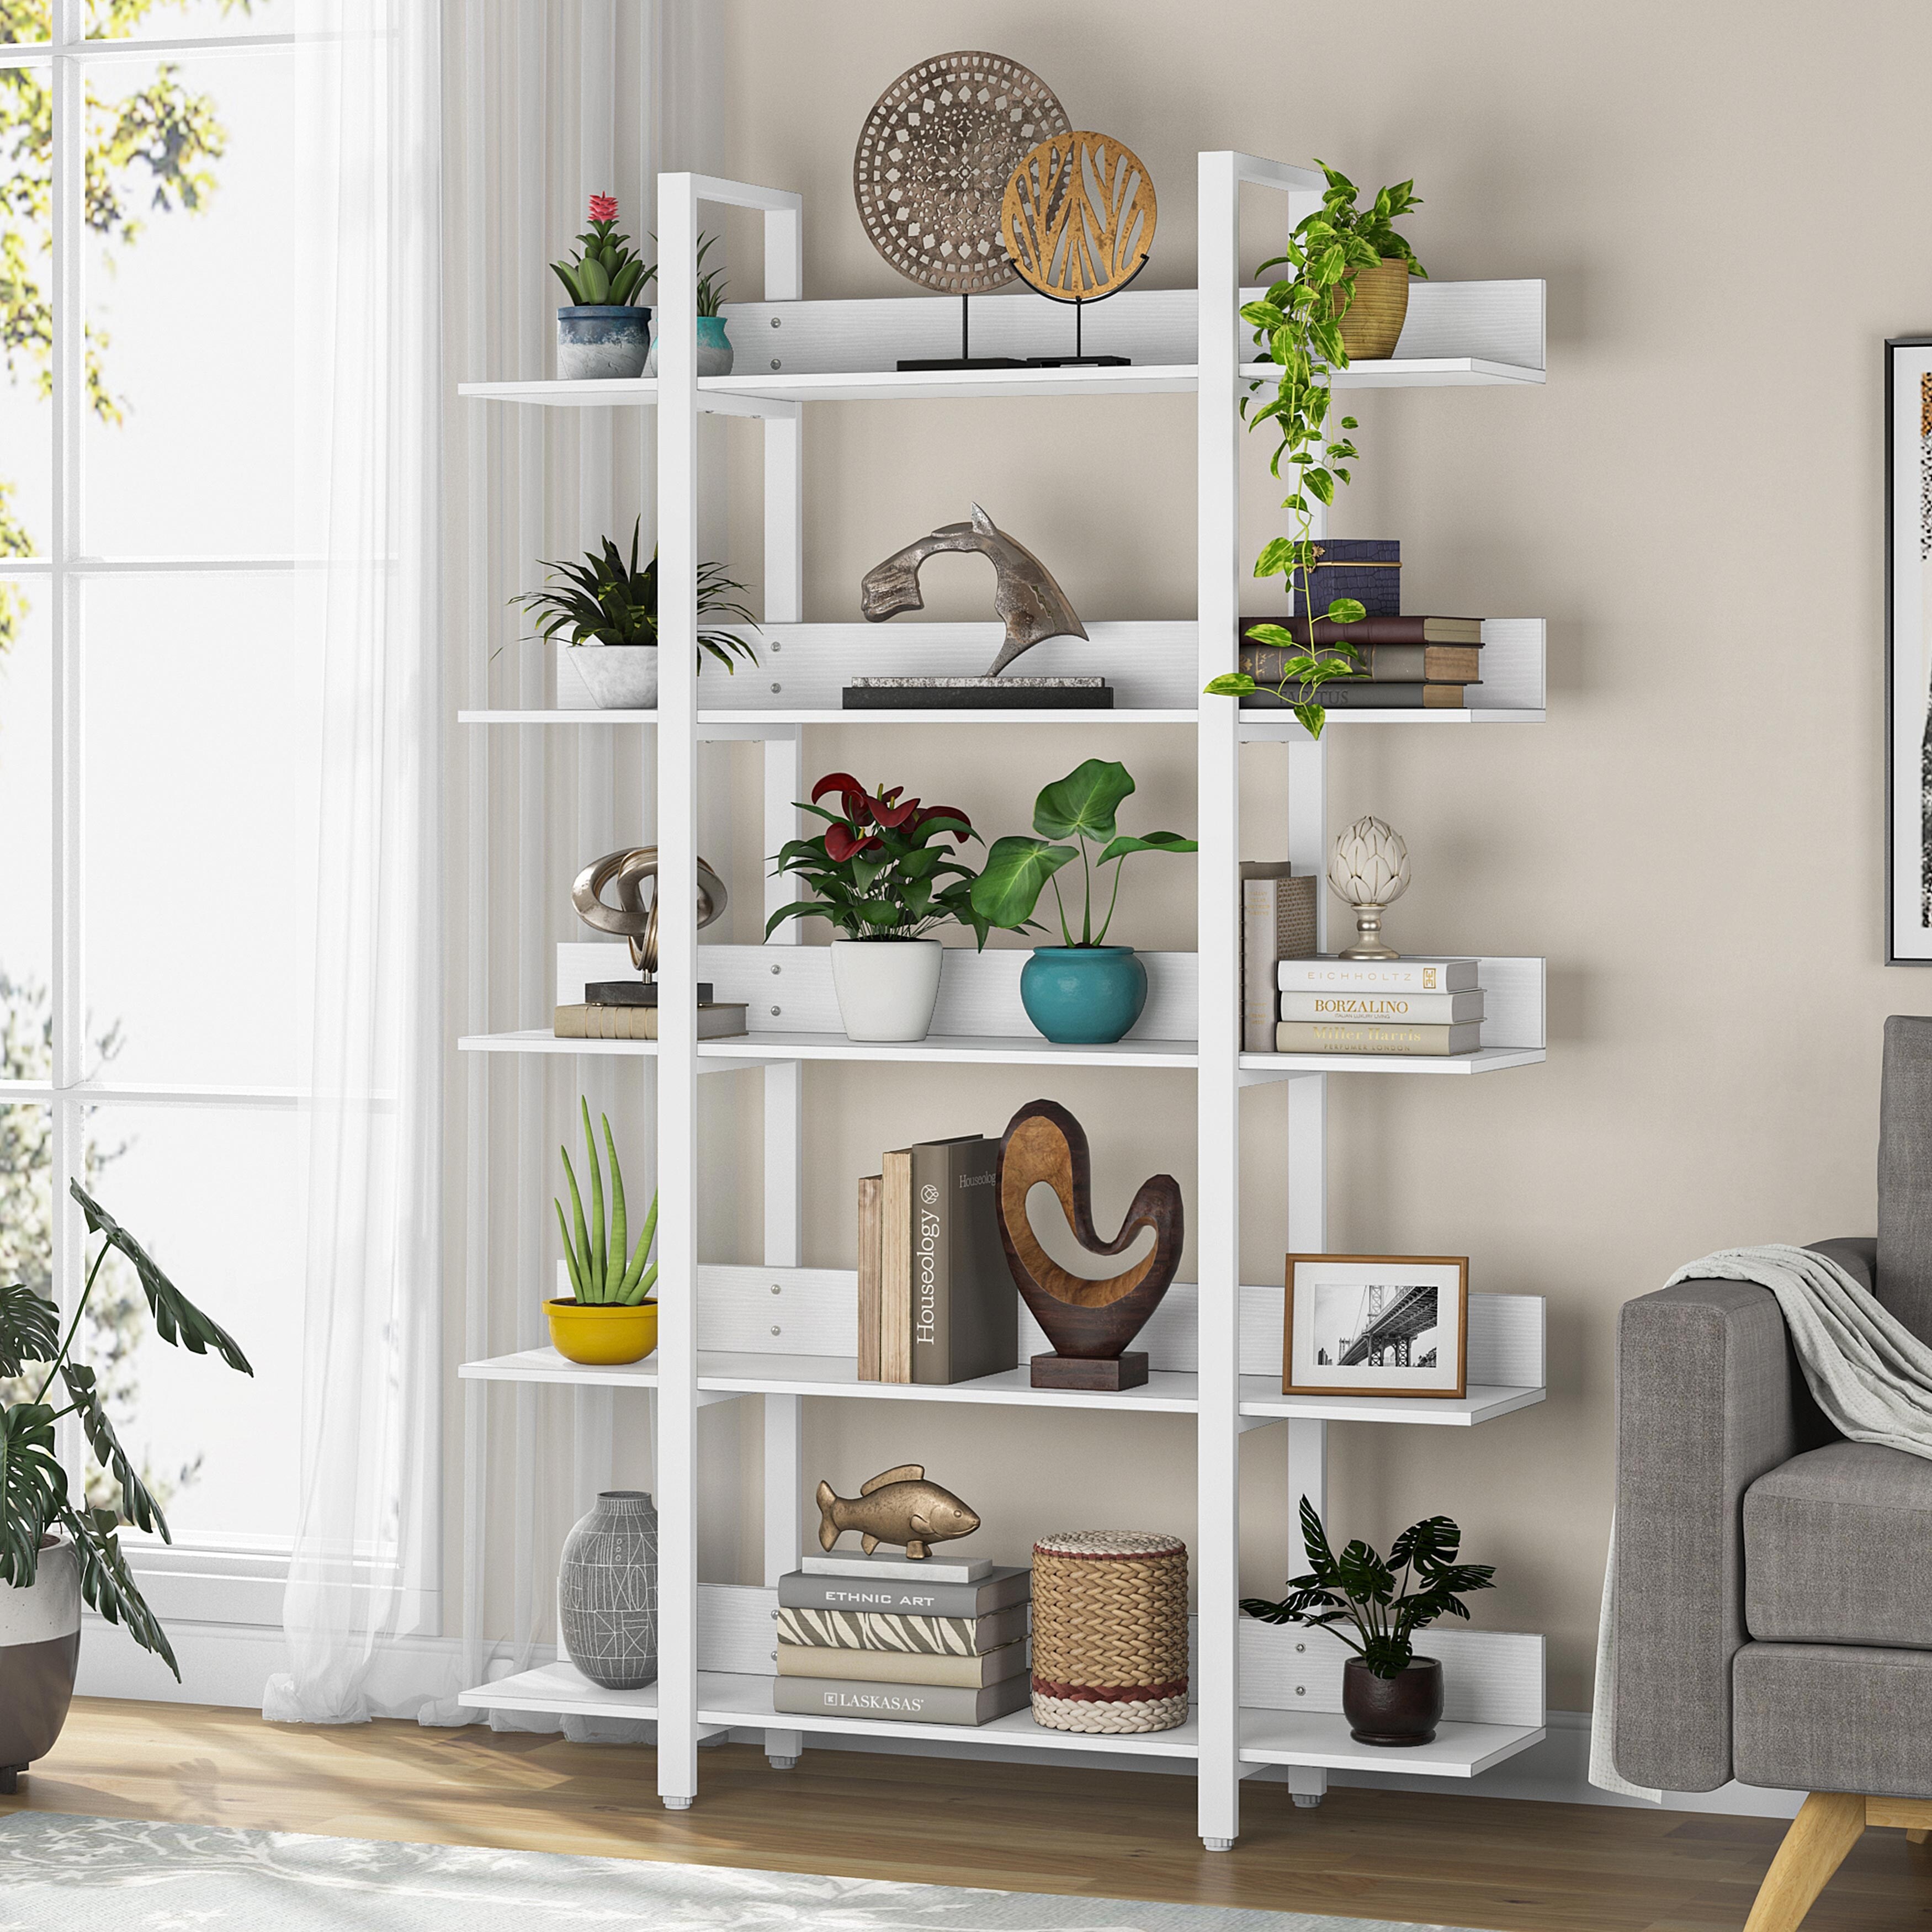 https://ak1.ostkcdn.com/images/products/is/images/direct/77a105a31a3d8de083f29ef111d226043c4d2d83/47%27%27-Bookcase%2C-Industrial-Bookshelves-Etagere-with-Storage%2C-Open-Display-Shelves.jpg